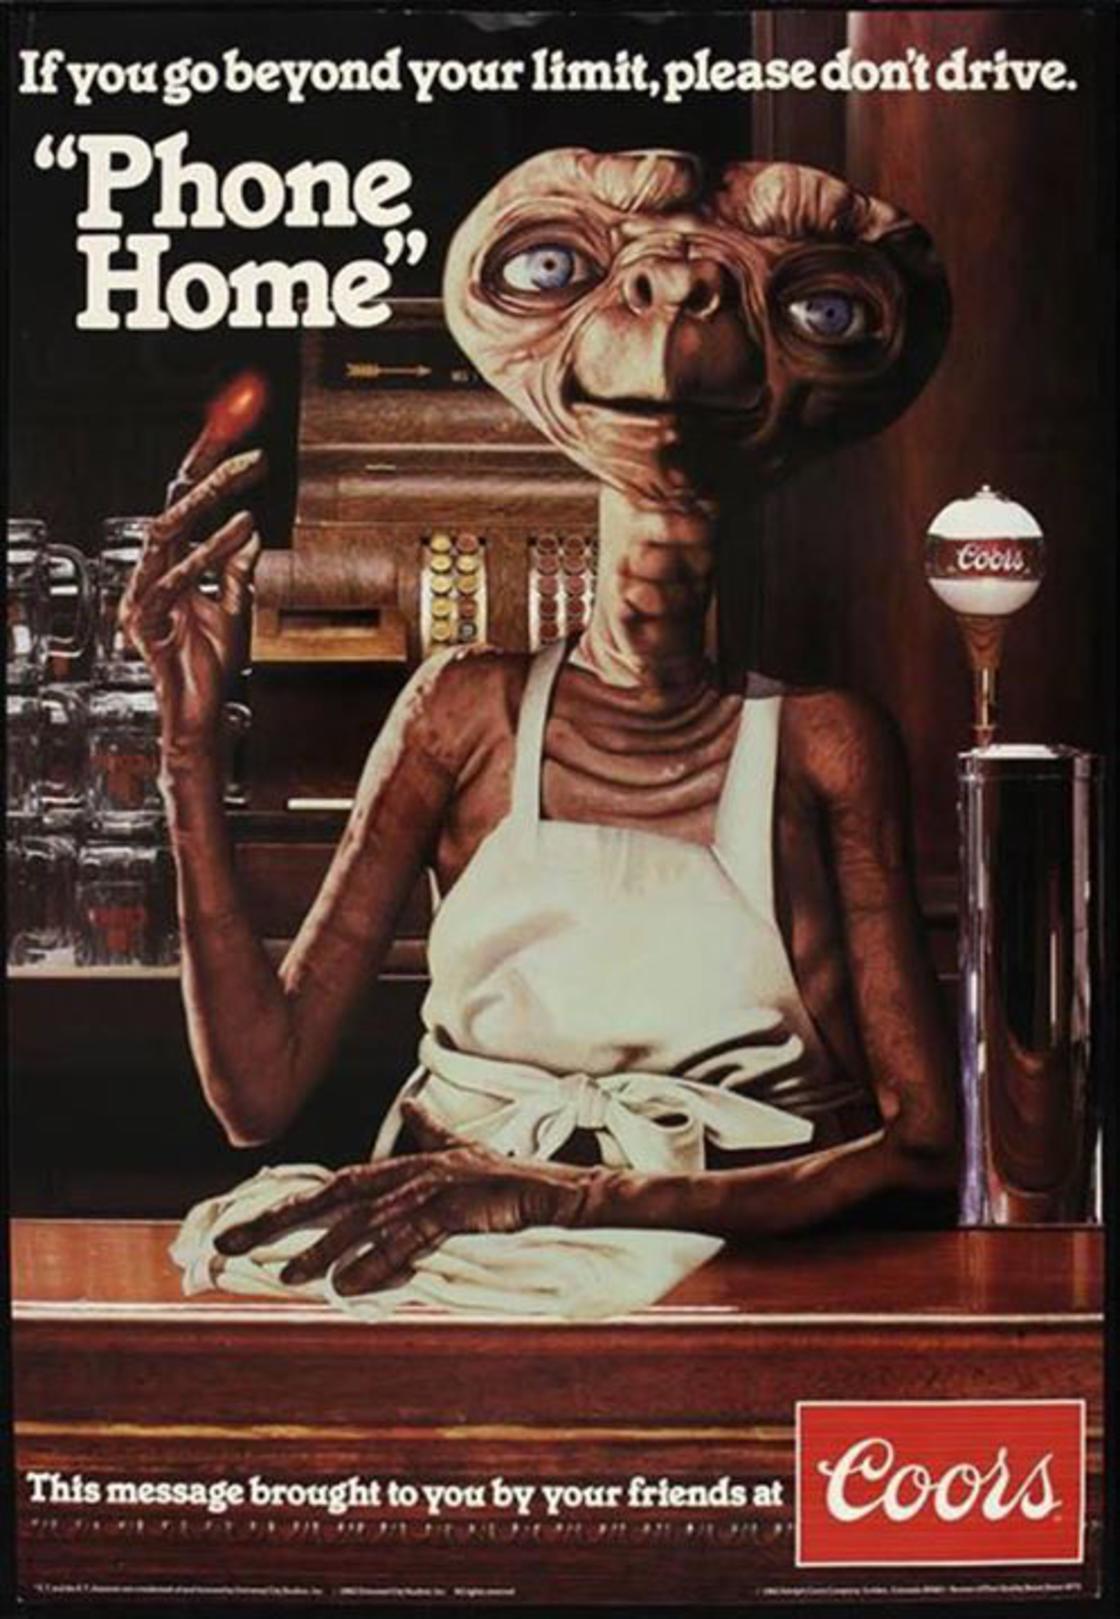 Old magazine add by Coors with ET reminding you to Phone Home if you have had too much to drink.